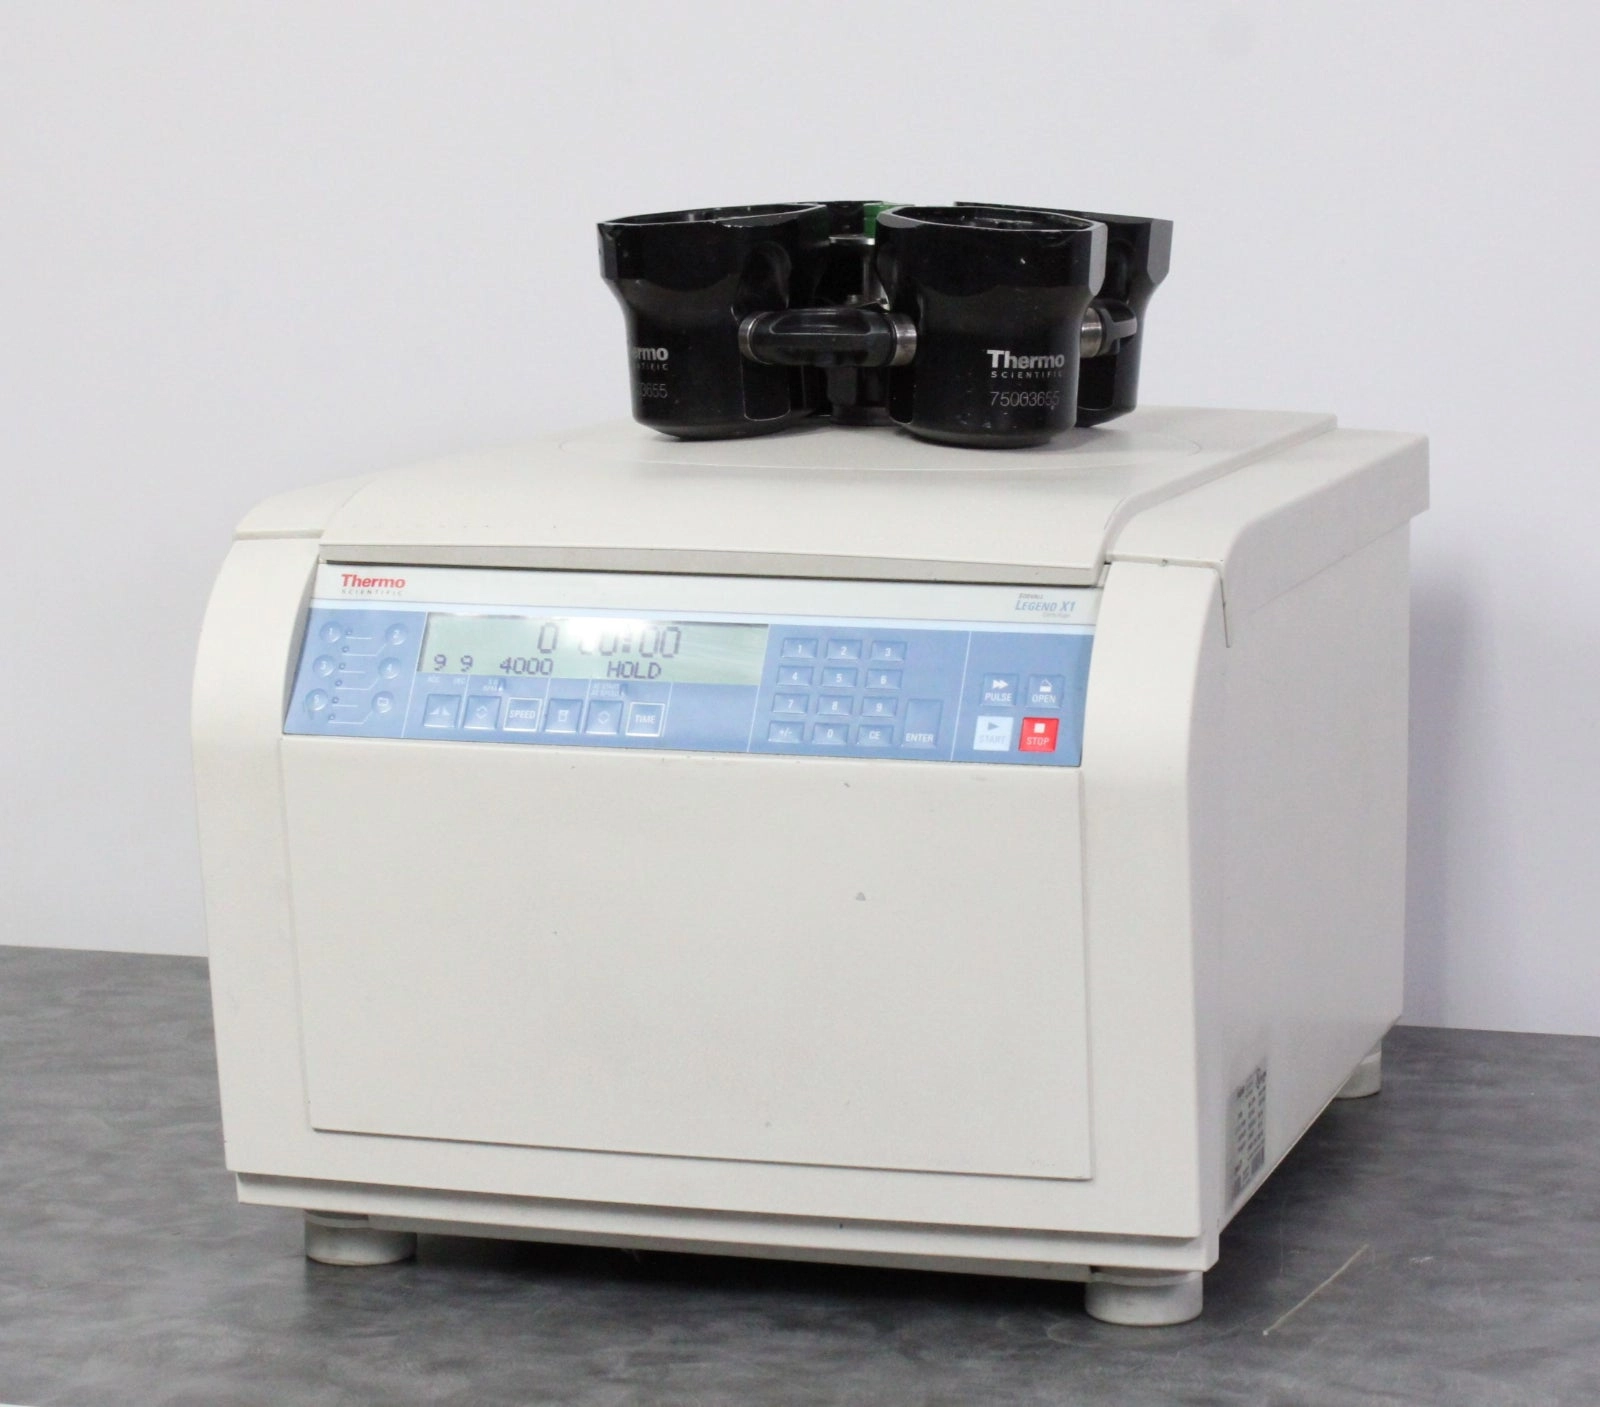 Thermo Sorvall Legend Multifuge X1 Benchtop Centrifuge &amp; 90-Day Warranty